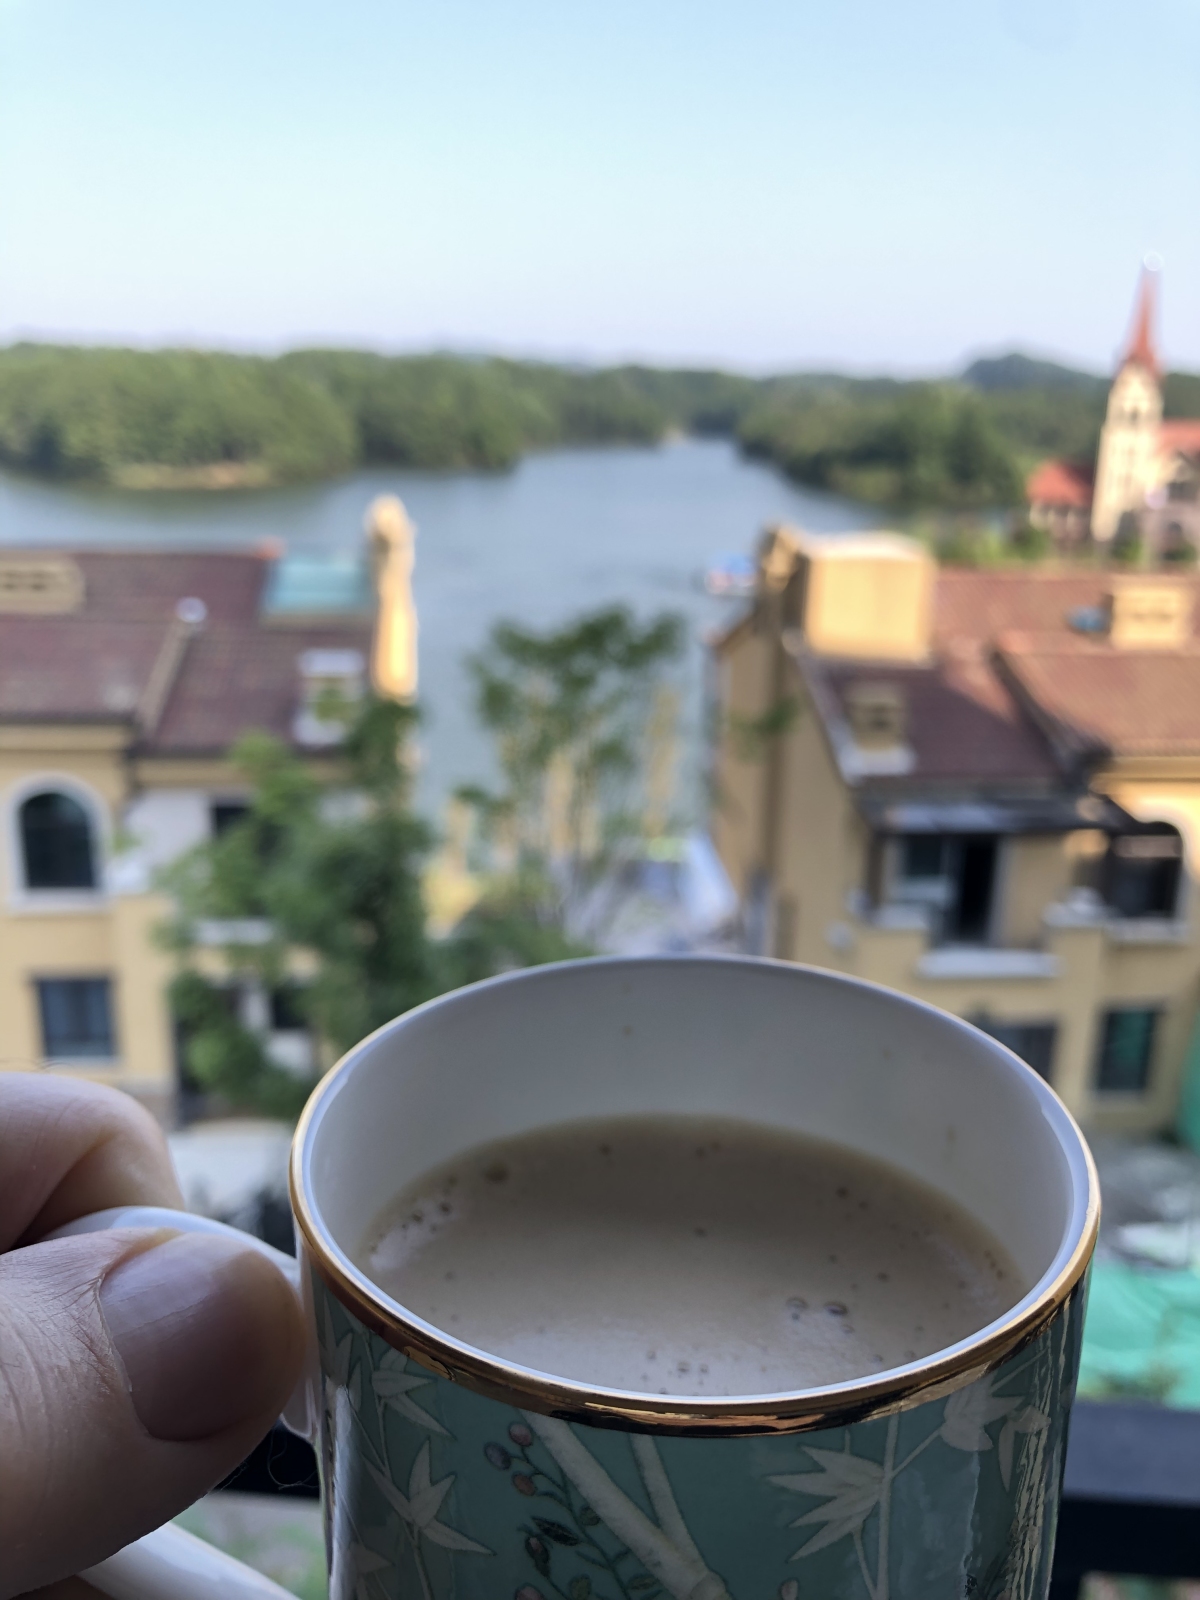 Waking up to a cappuccino coffee and this view felt like it took 5 years of stress off of my life.